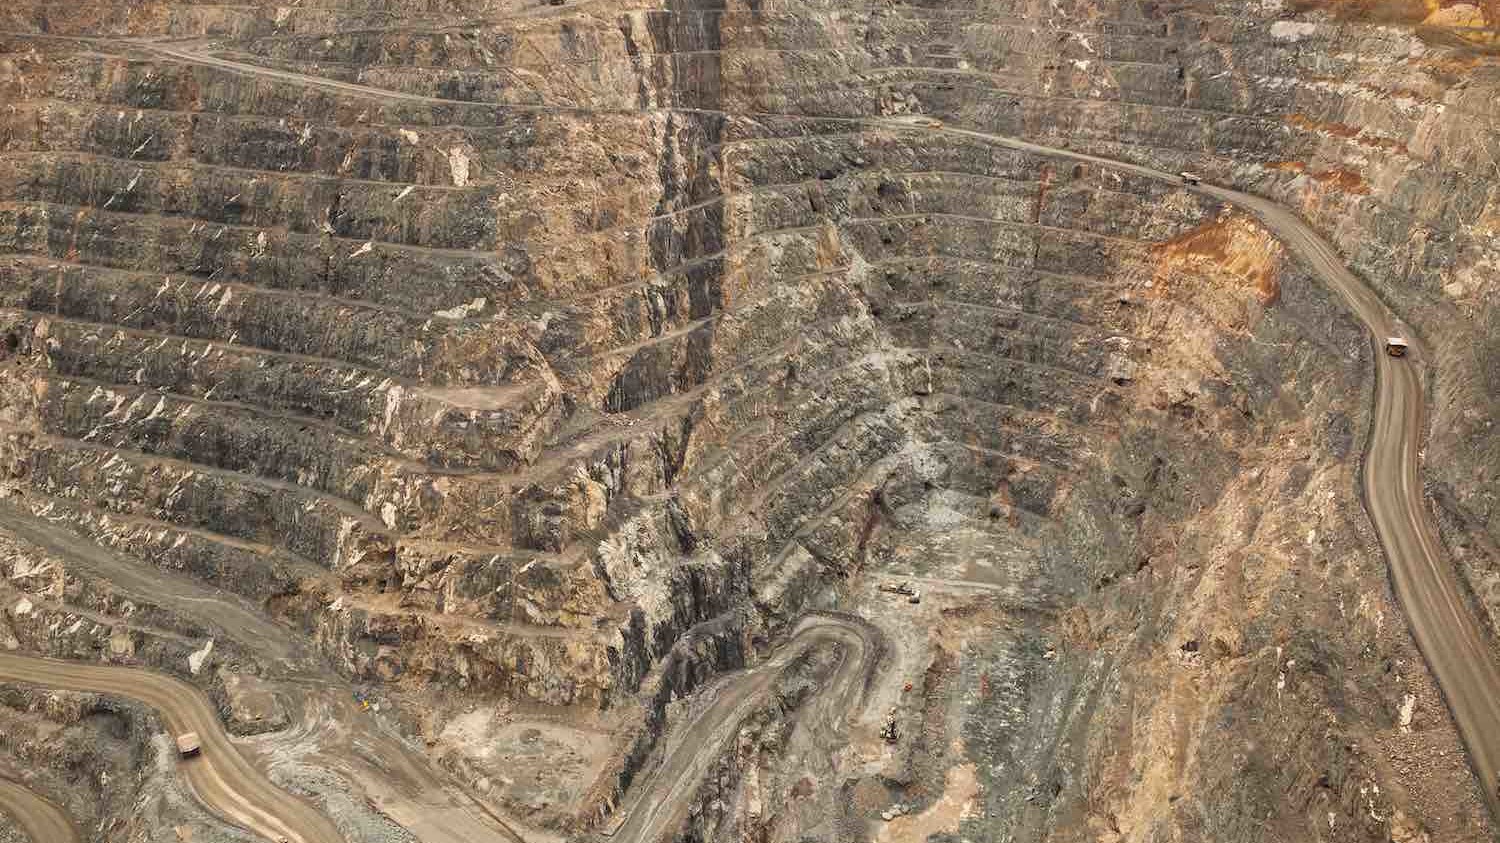 haulage-systems-for-open-pit-mines